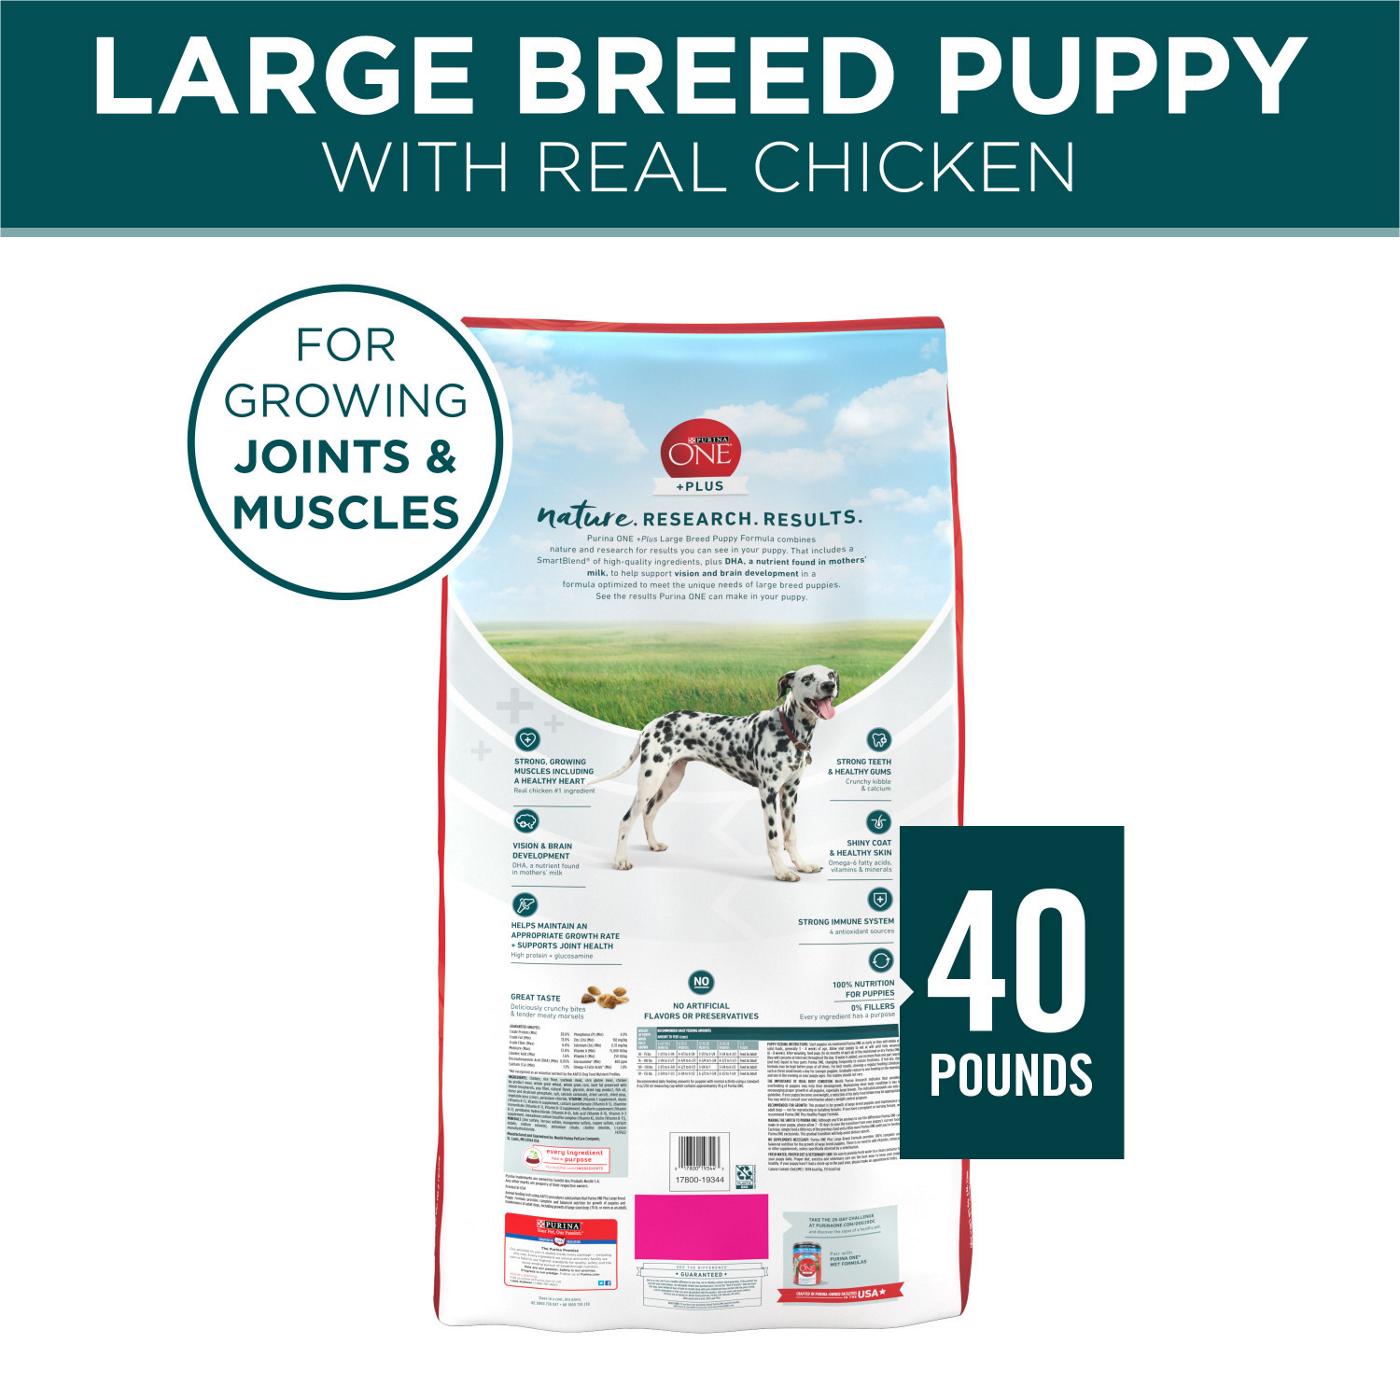 Purina ONE Purina ONE Plus Large Breed Puppy Food Dry Formula; image 3 of 6